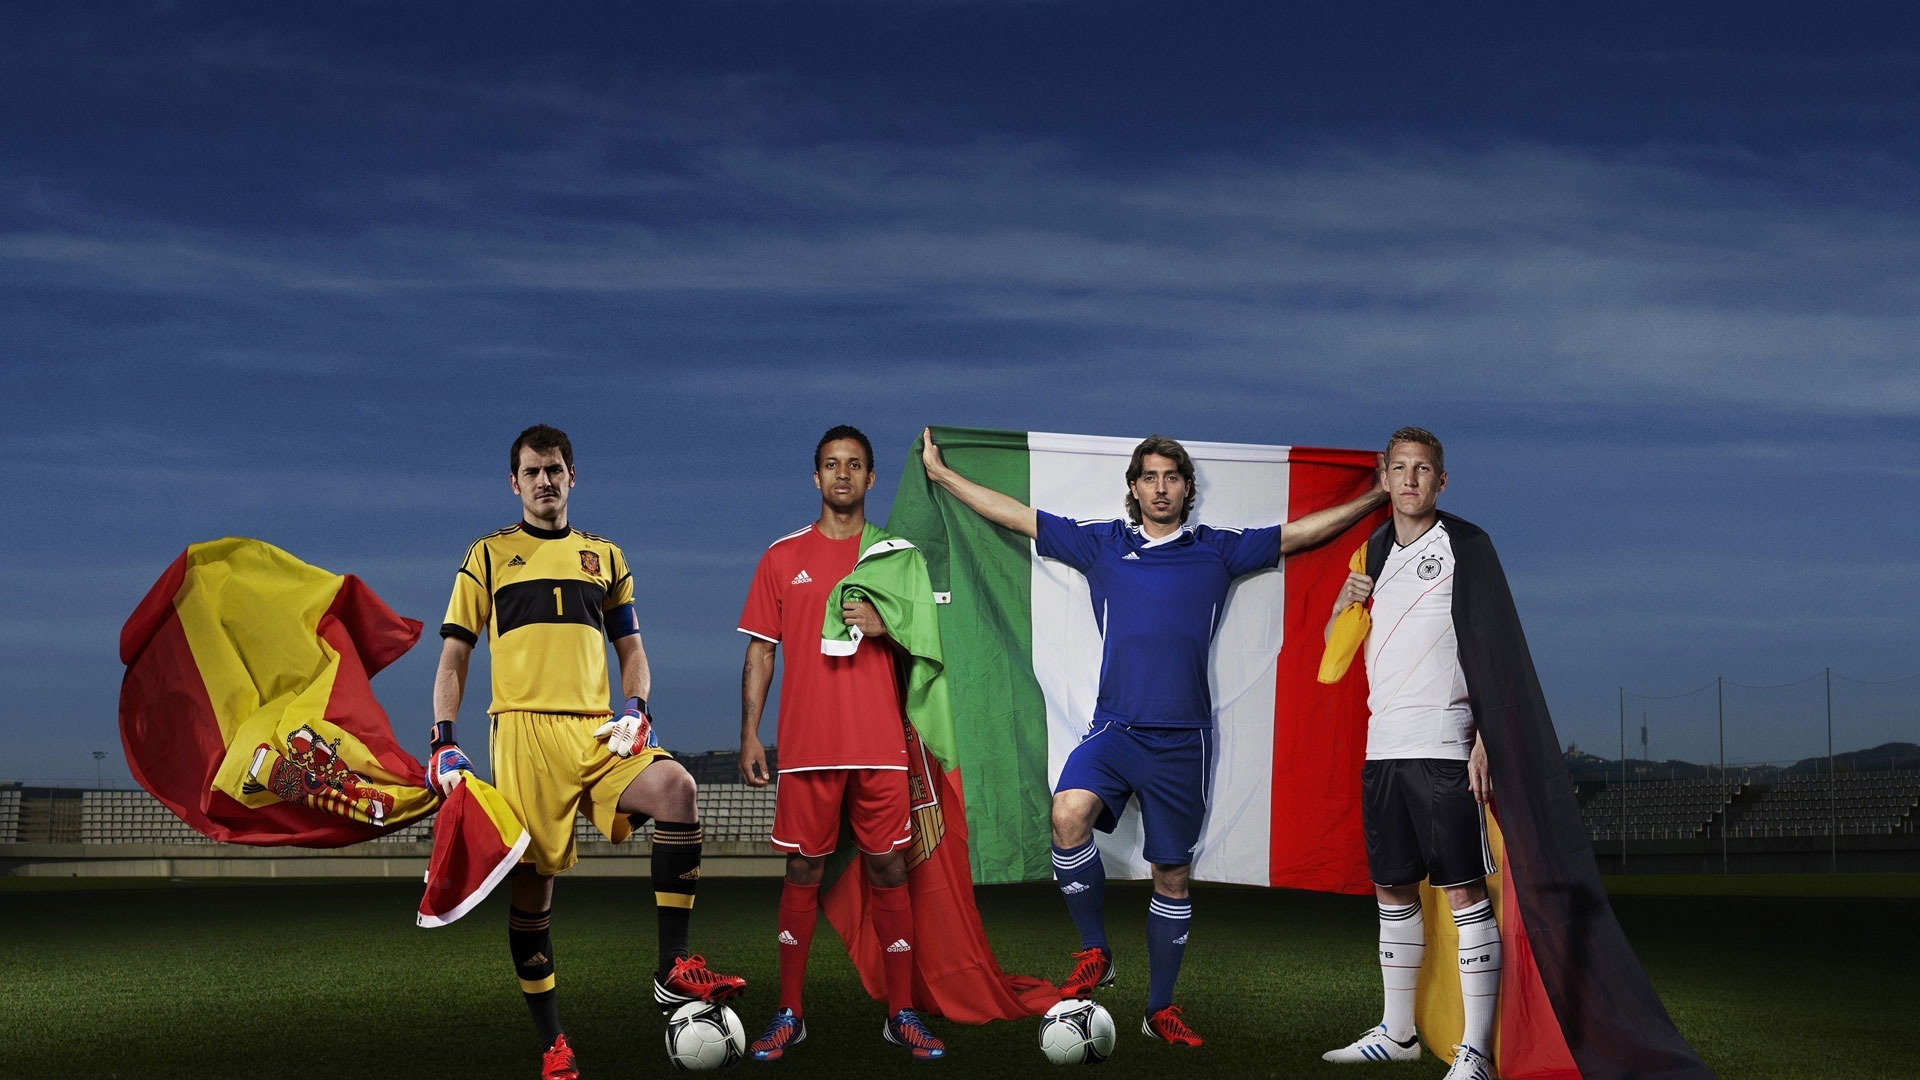 Spain Portugal Italy and Germany for 1920 x 1080 HDTV 1080p resolution